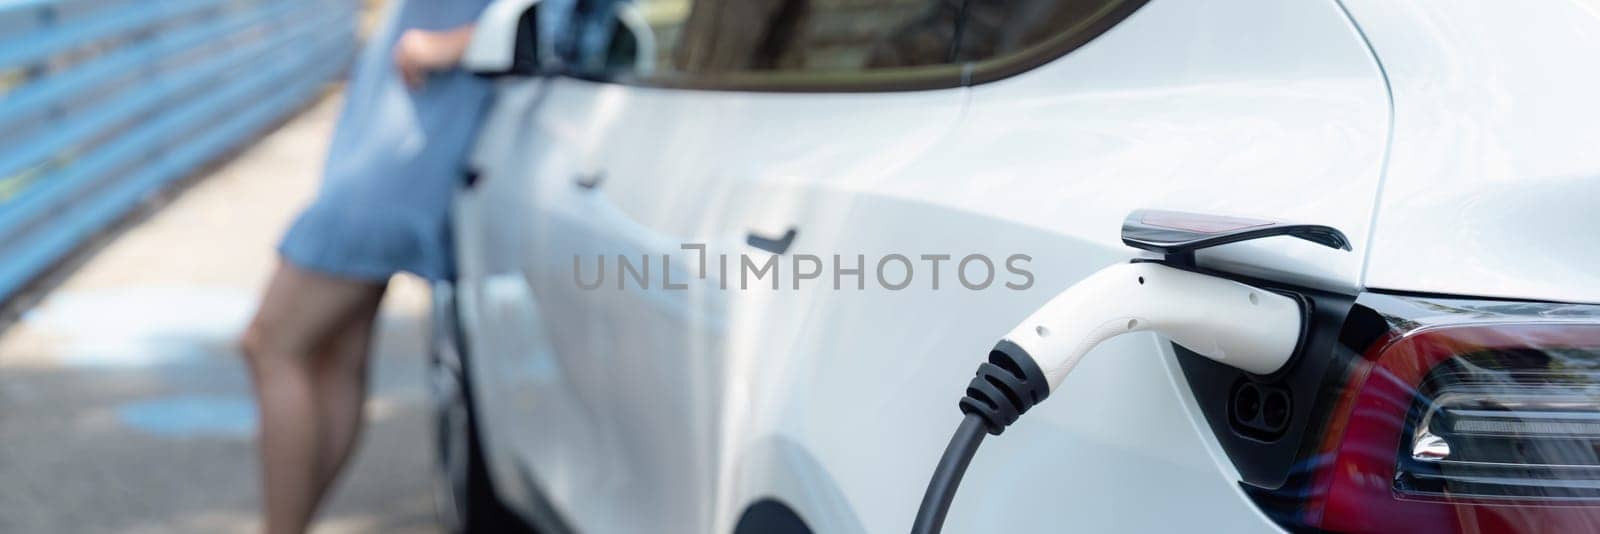 Electric vehicle recharging battery from home EV charging station using alternative energy with net zero emission on blurred background of young girl charging before vacation travel.Panorama Perpetual